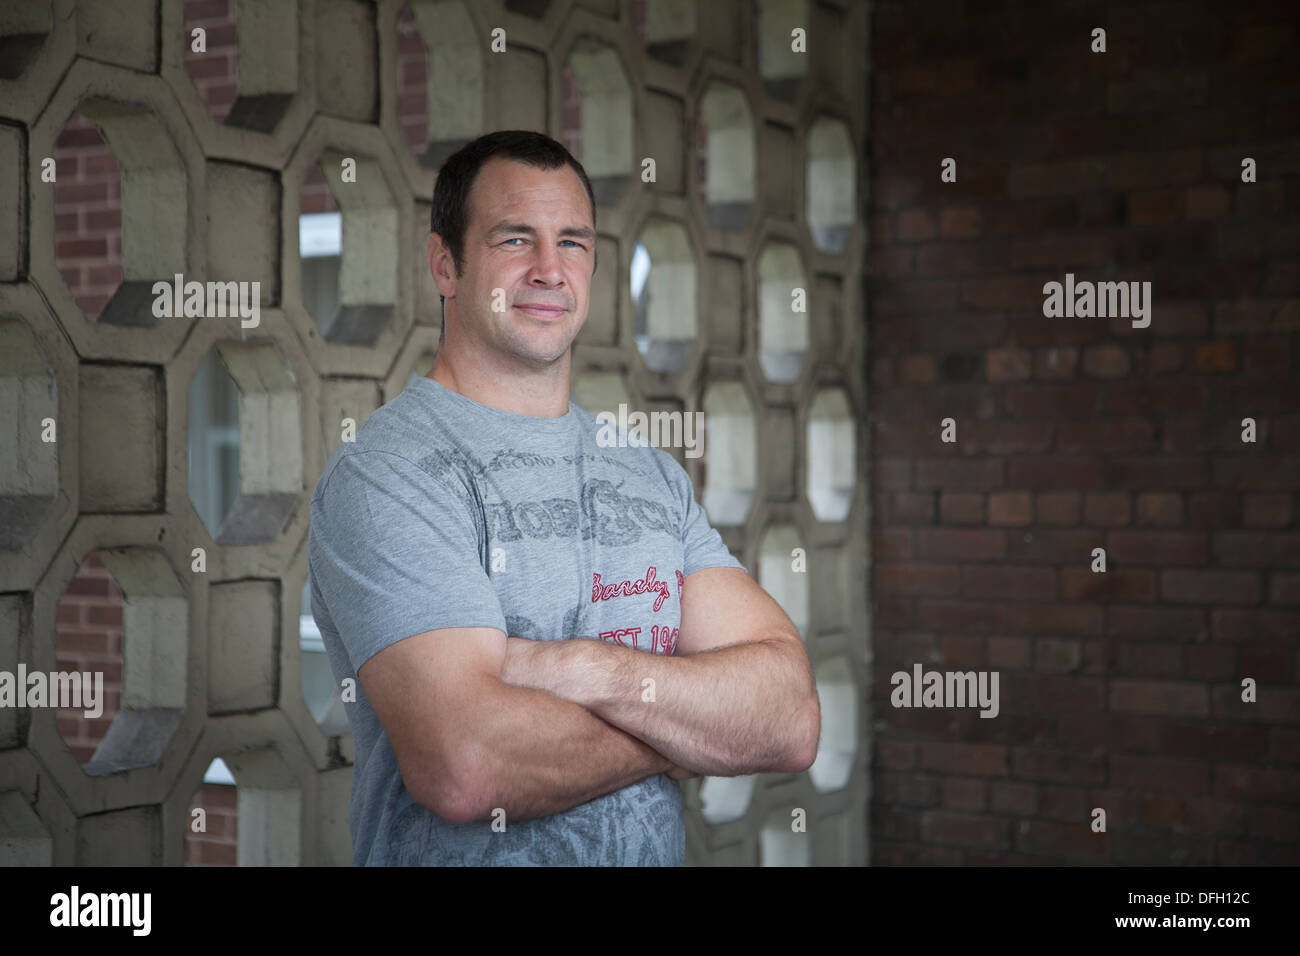 Adrian Morley, Salford Red Devils Rugby League player Stock Photo